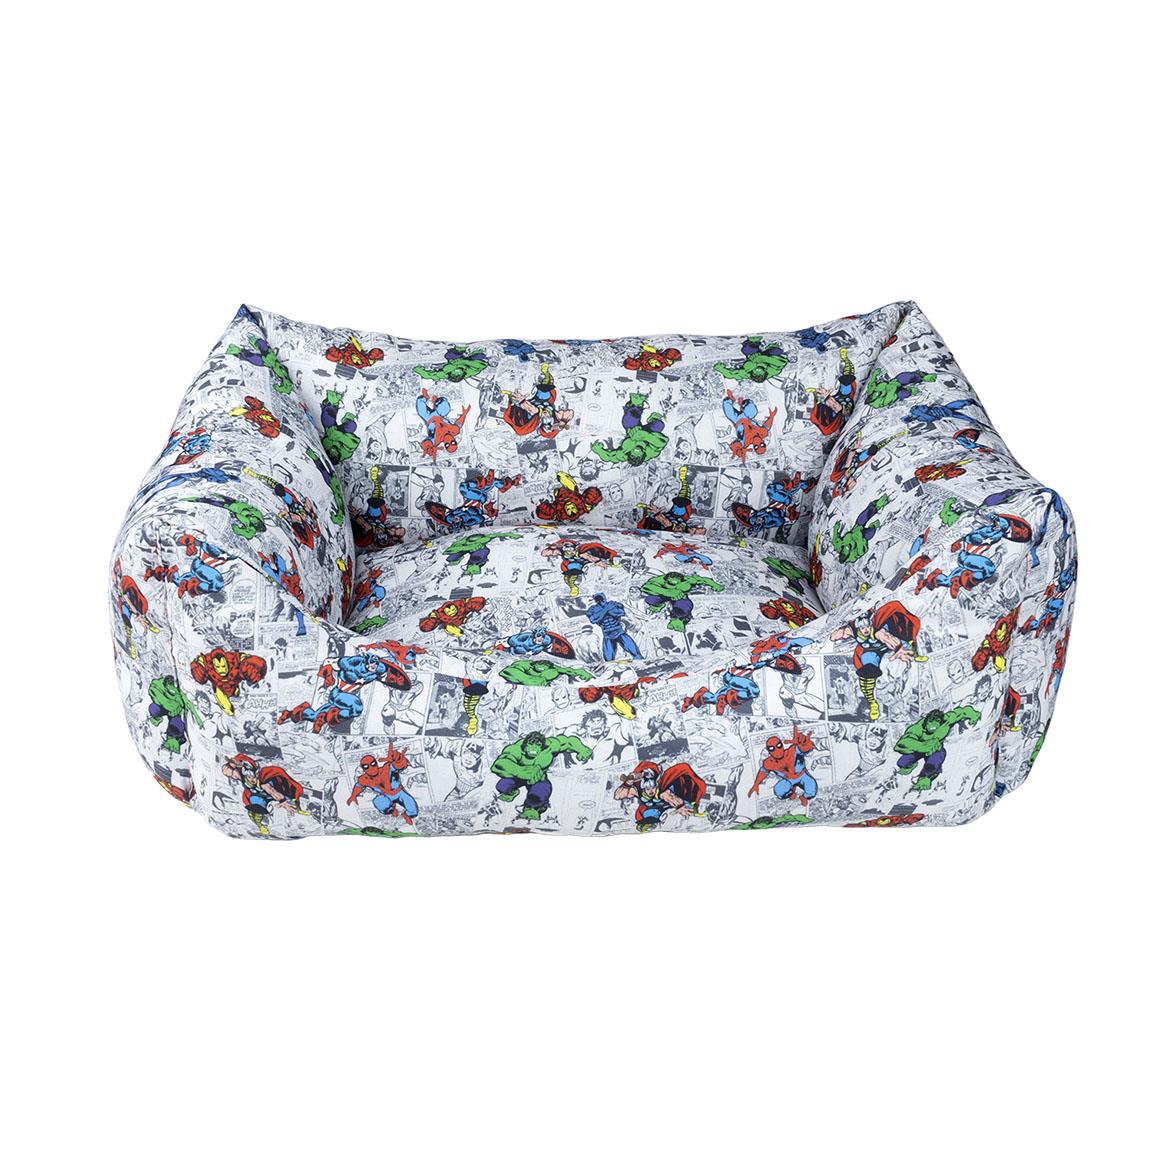 Marvel cat bed / A cat bed worthy of the universe's greatest protectors